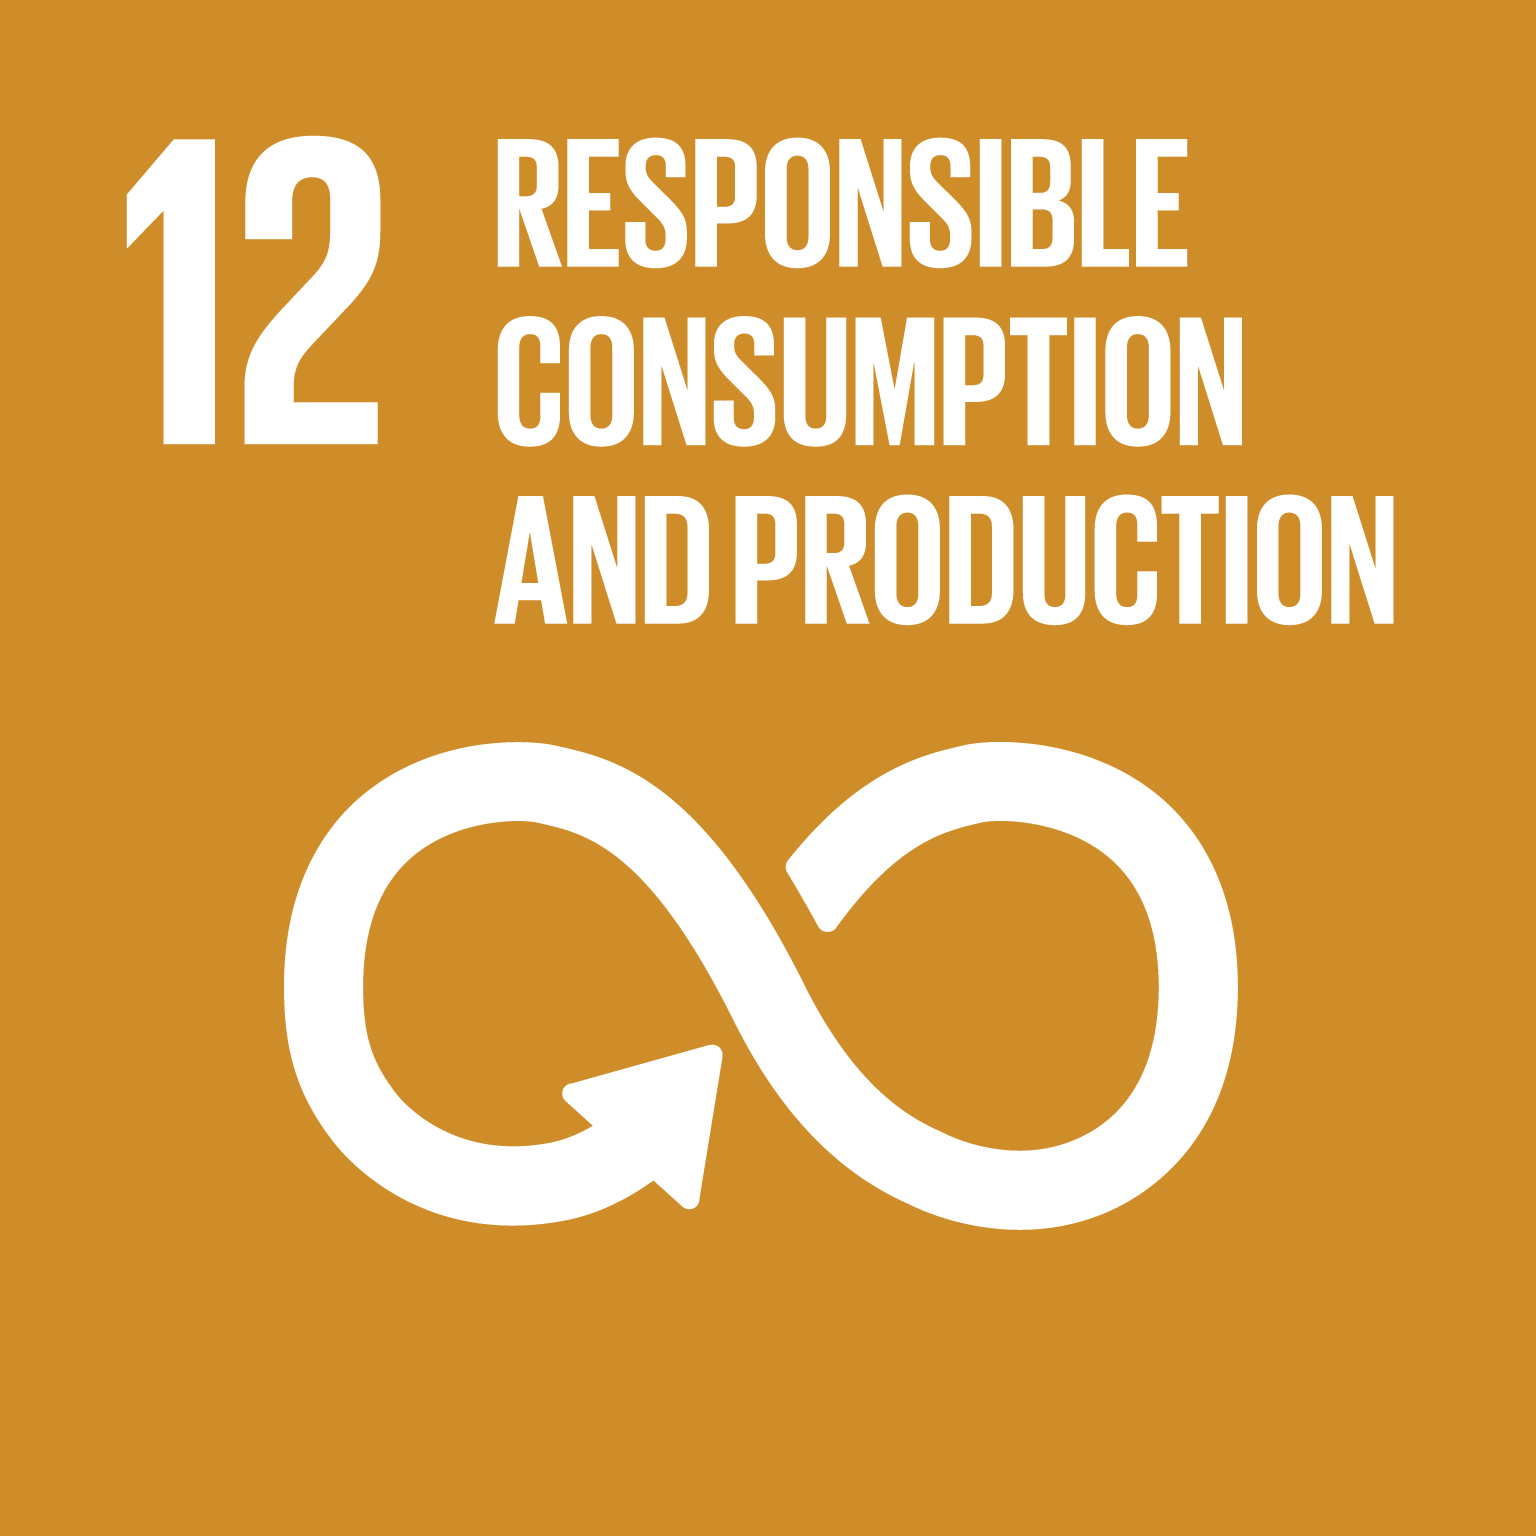 sustainable development goal number 12 icon 